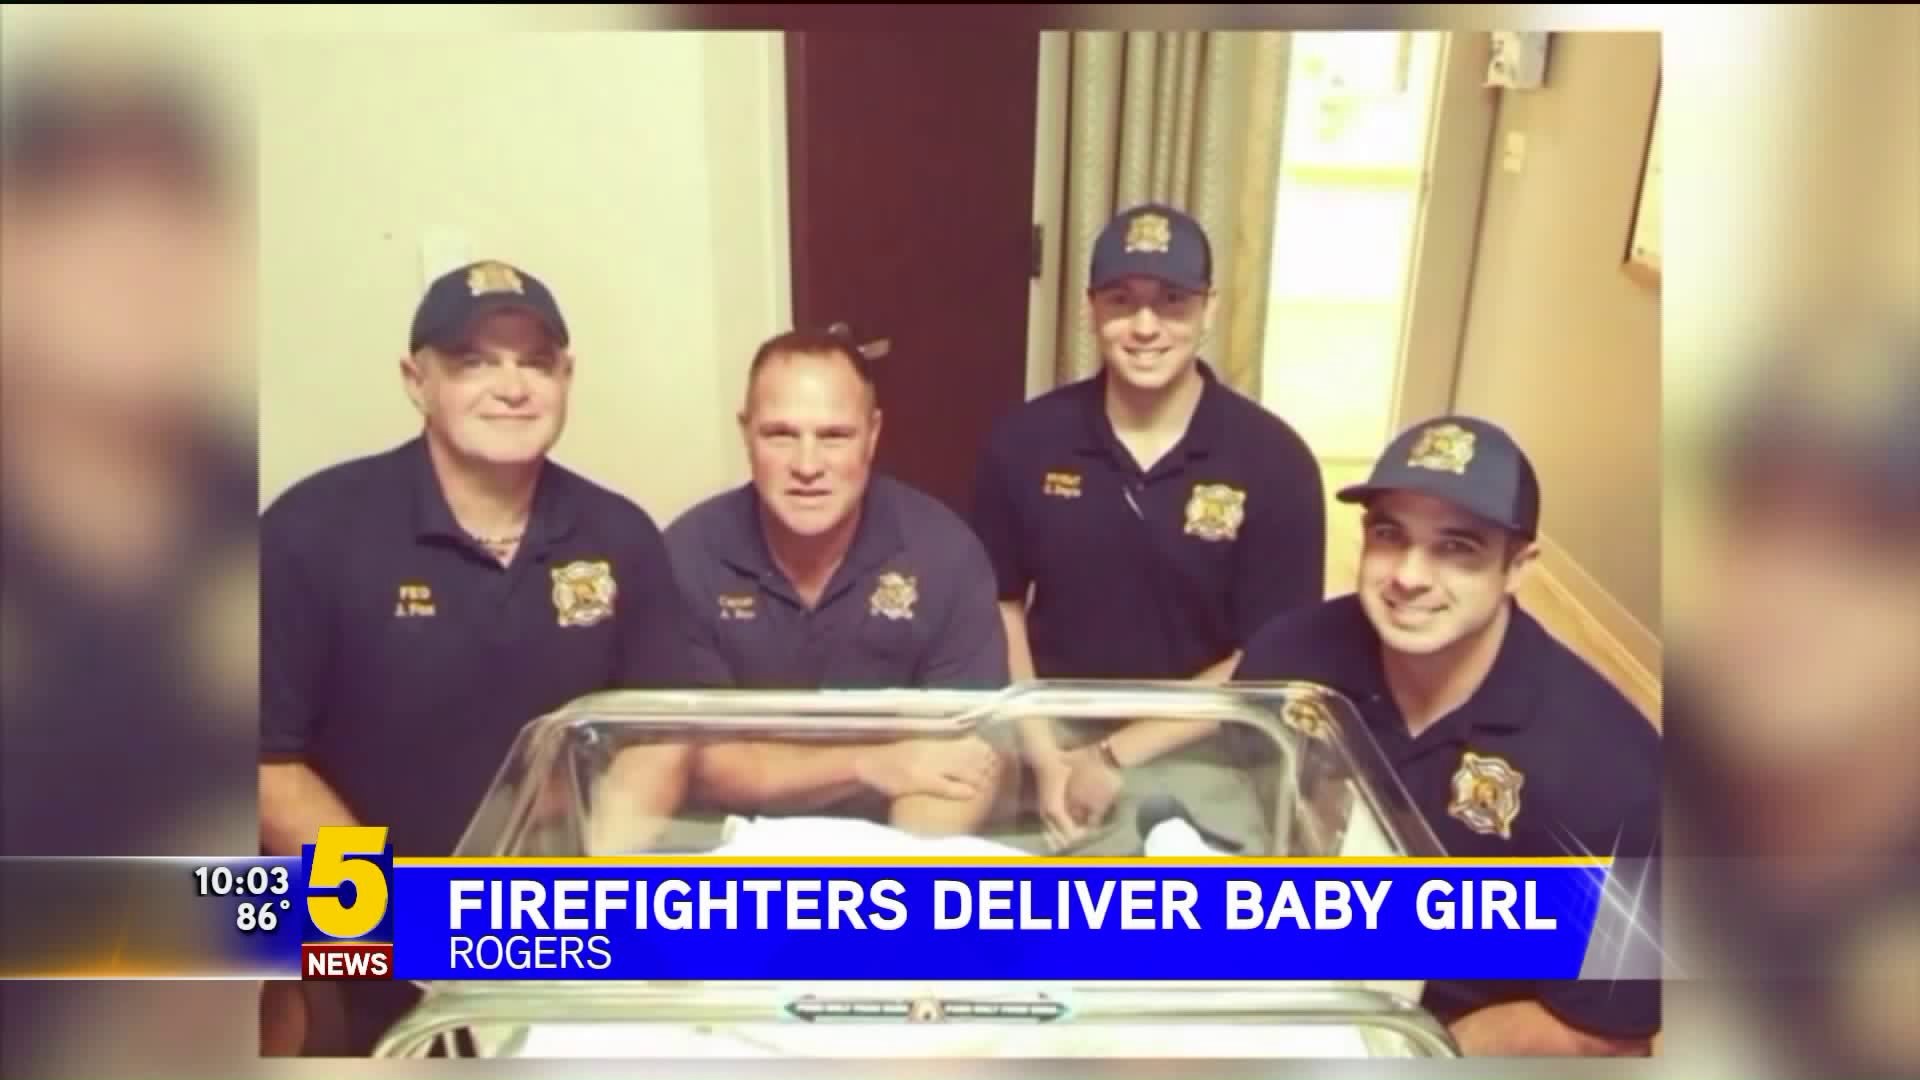 Rogers firefighters deliver baby girl